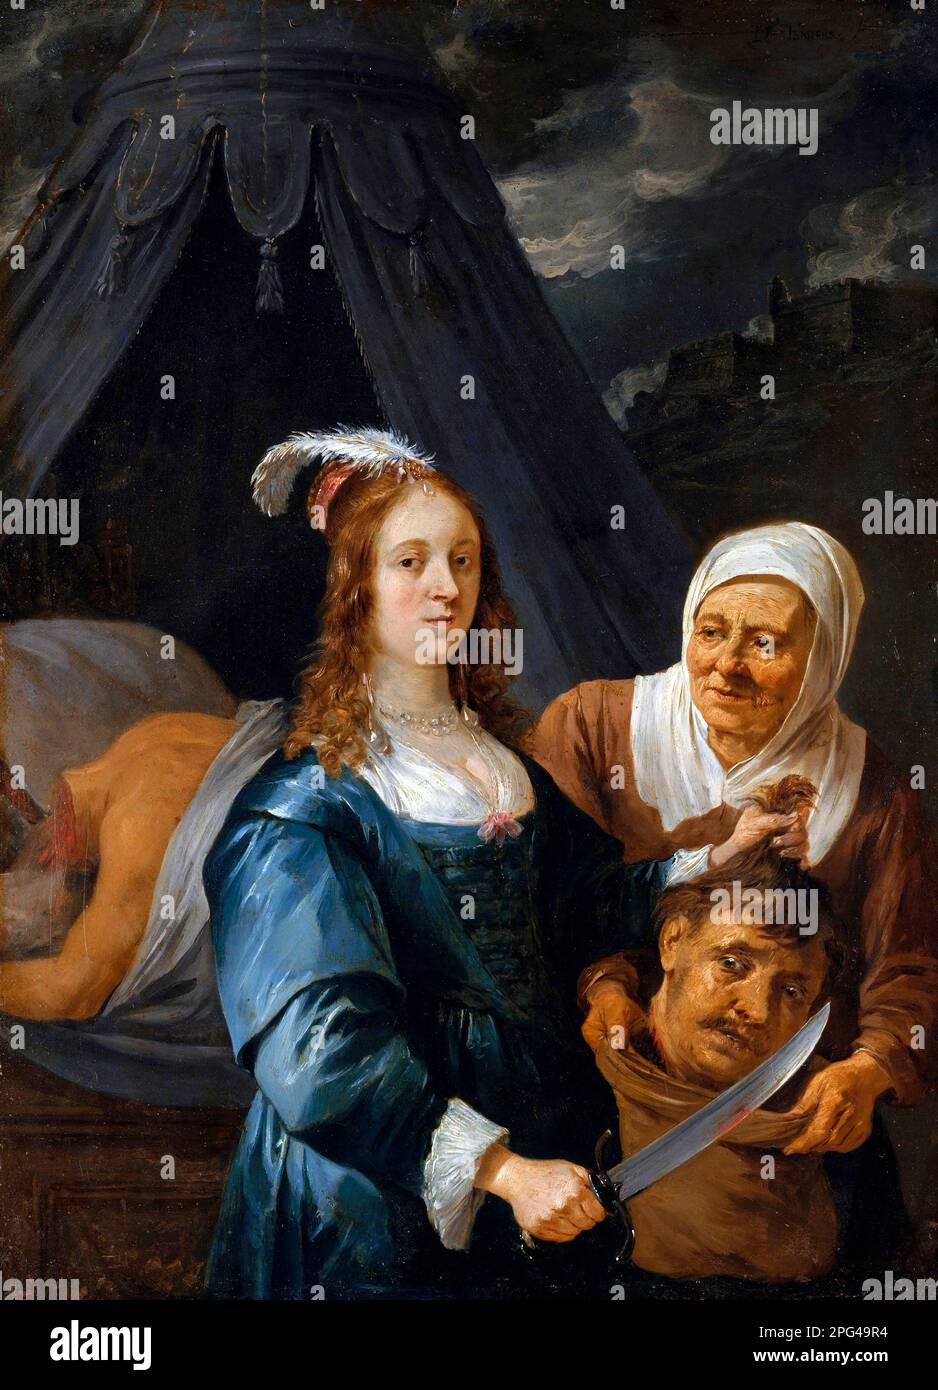 Judith with the Head of Holofernes by David Teniers the Younger (1610-1690), oil on copper, 1650s Stock Photo